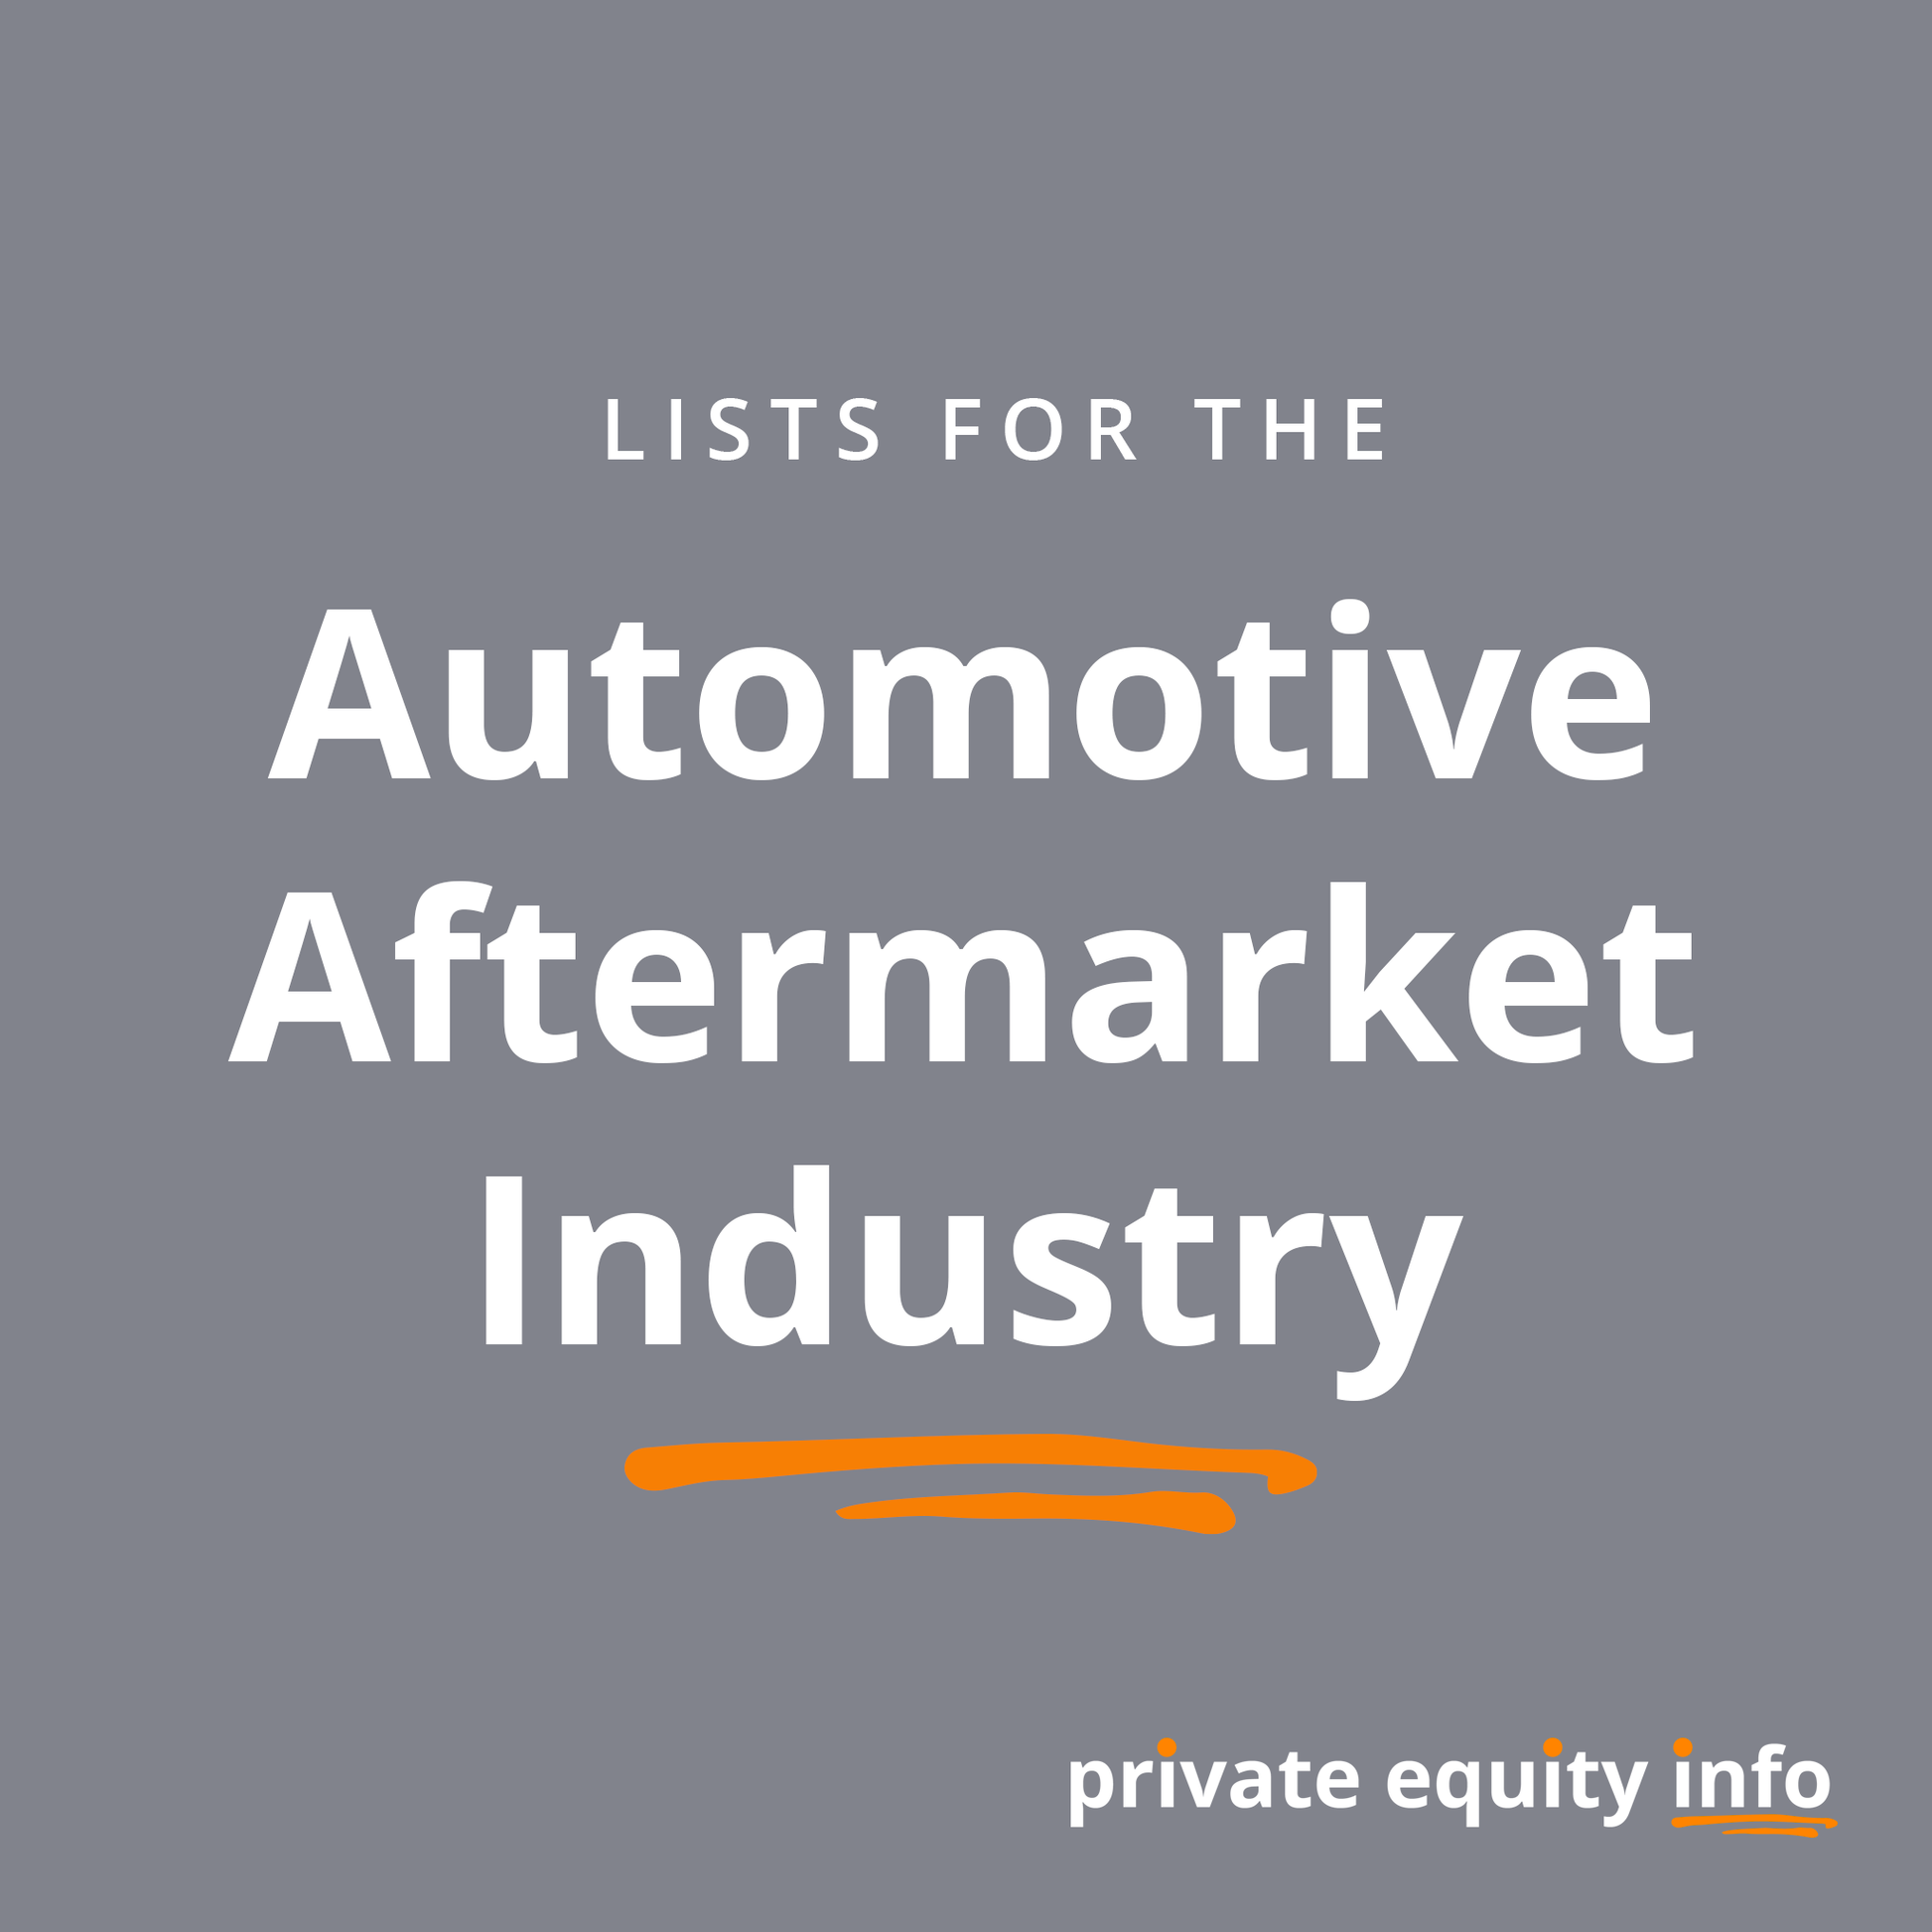 List of Private Equity Firms in Automotive Aftermarket